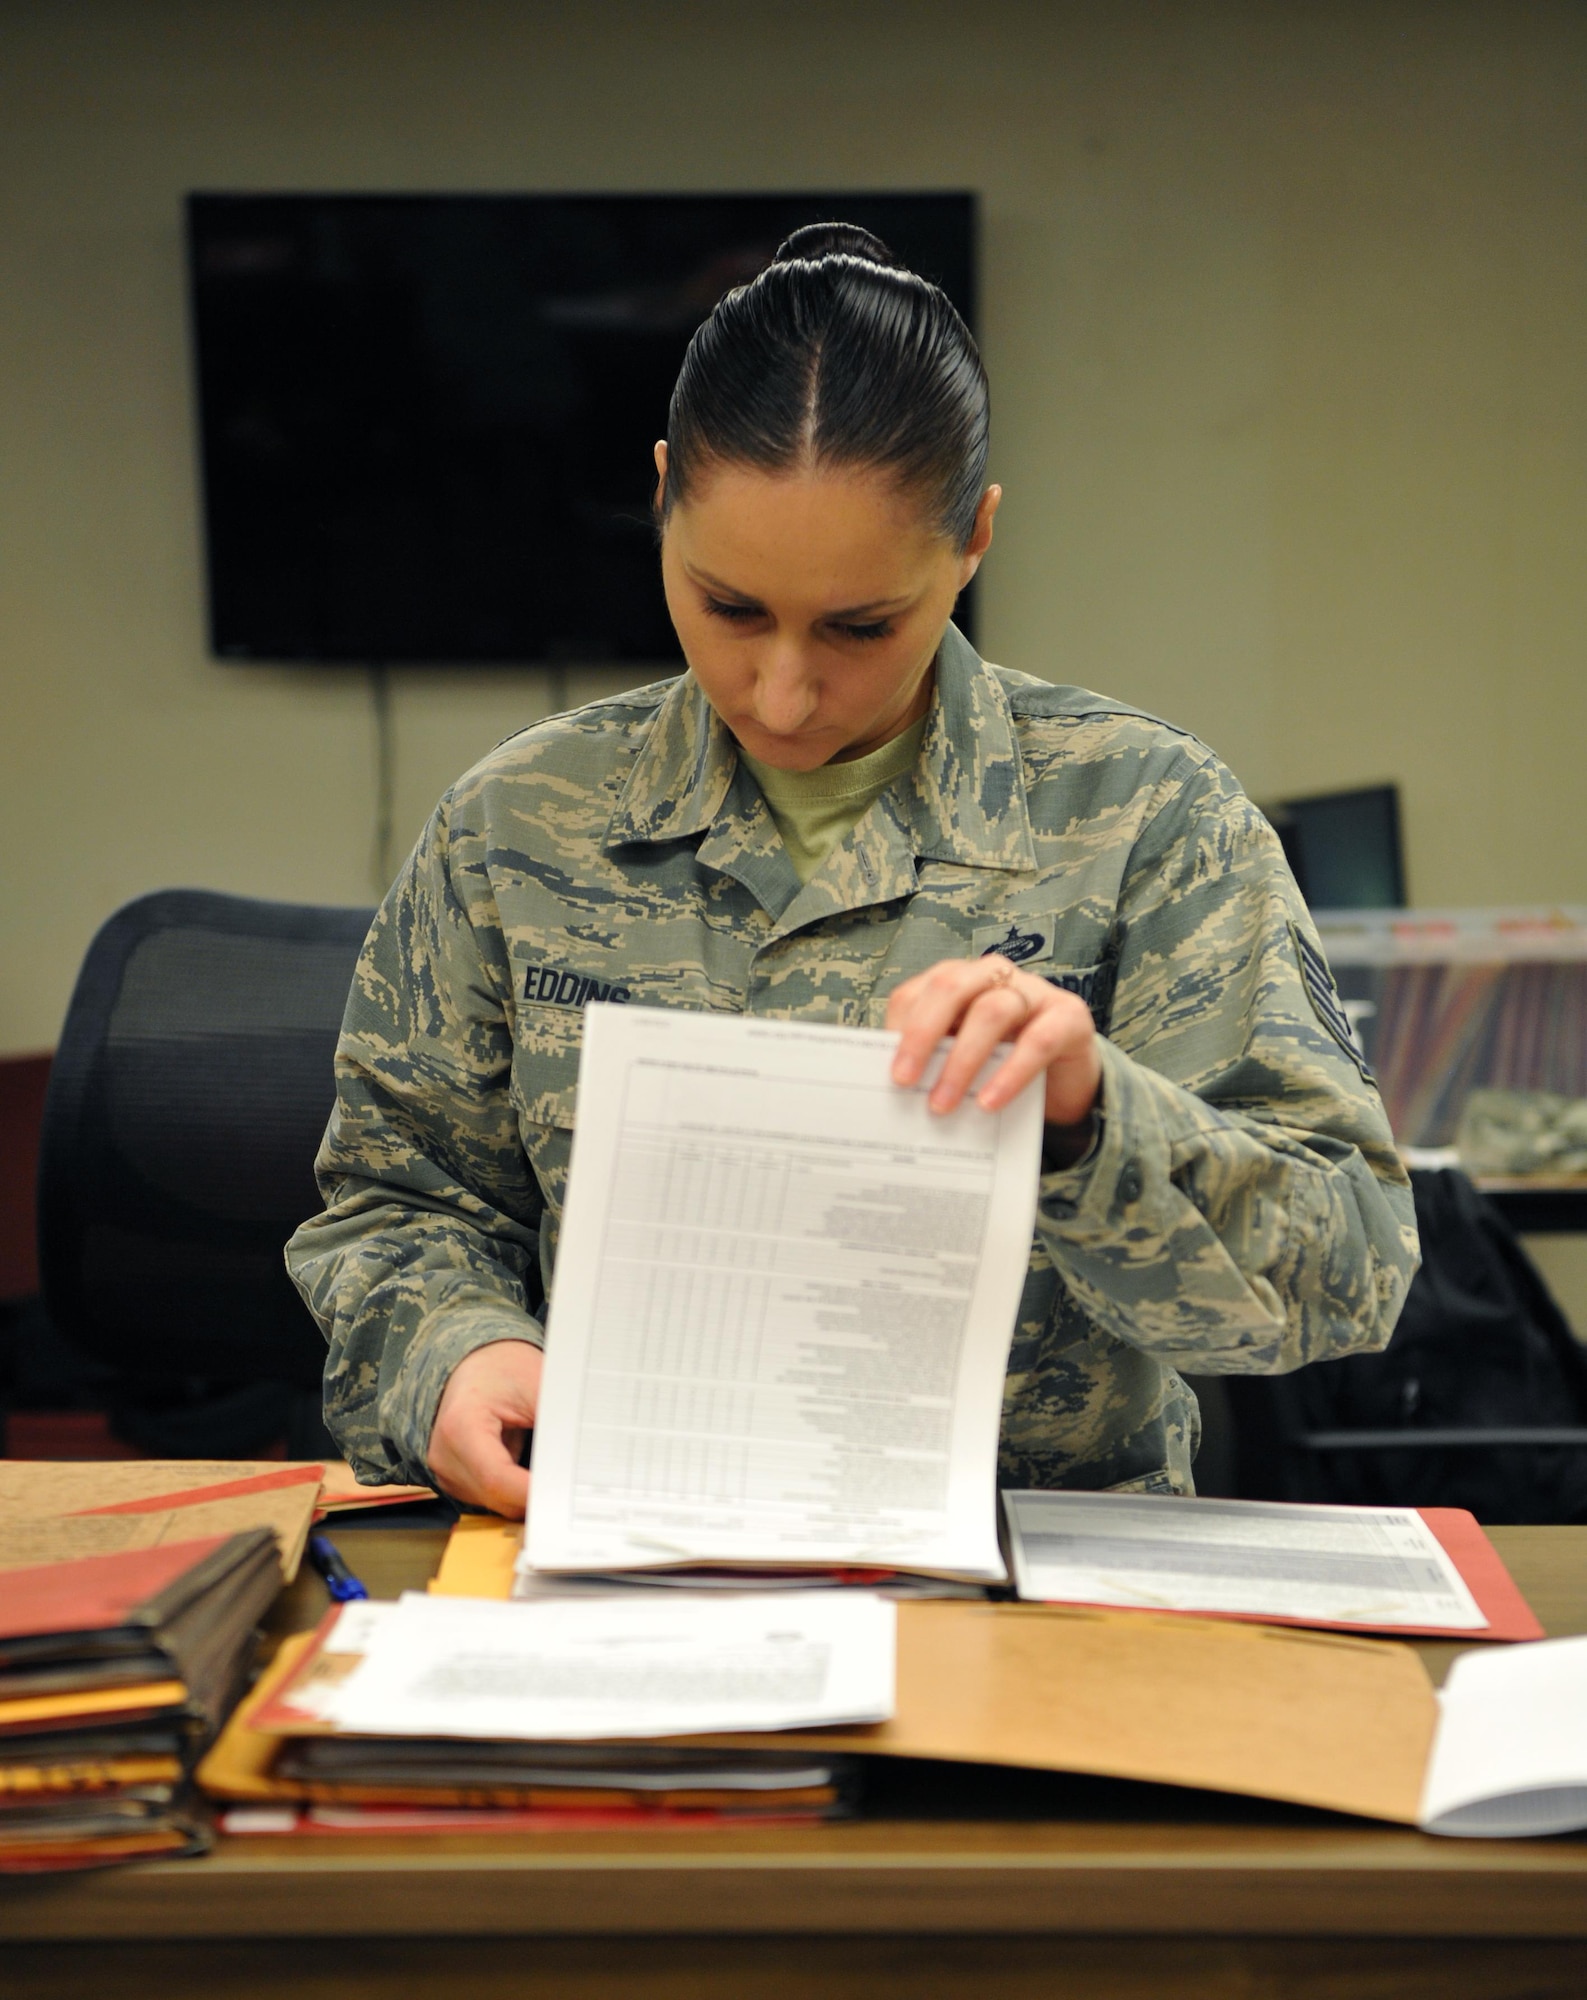 Tech. Sgt. Cassandra Eddins, 9th Force Support Squadron noncommissioned officer in charge of installation personnel readiness, reviews a completed pre-deployment checklist Feb. 22, 2017, at Beale Air Force Base, California. IPR works closely with unit deployment managers to ensure the checklists are filled out correctly by individuals deploying. (U.S. Air Force photo/Airman Tristan D. Viglianco) 